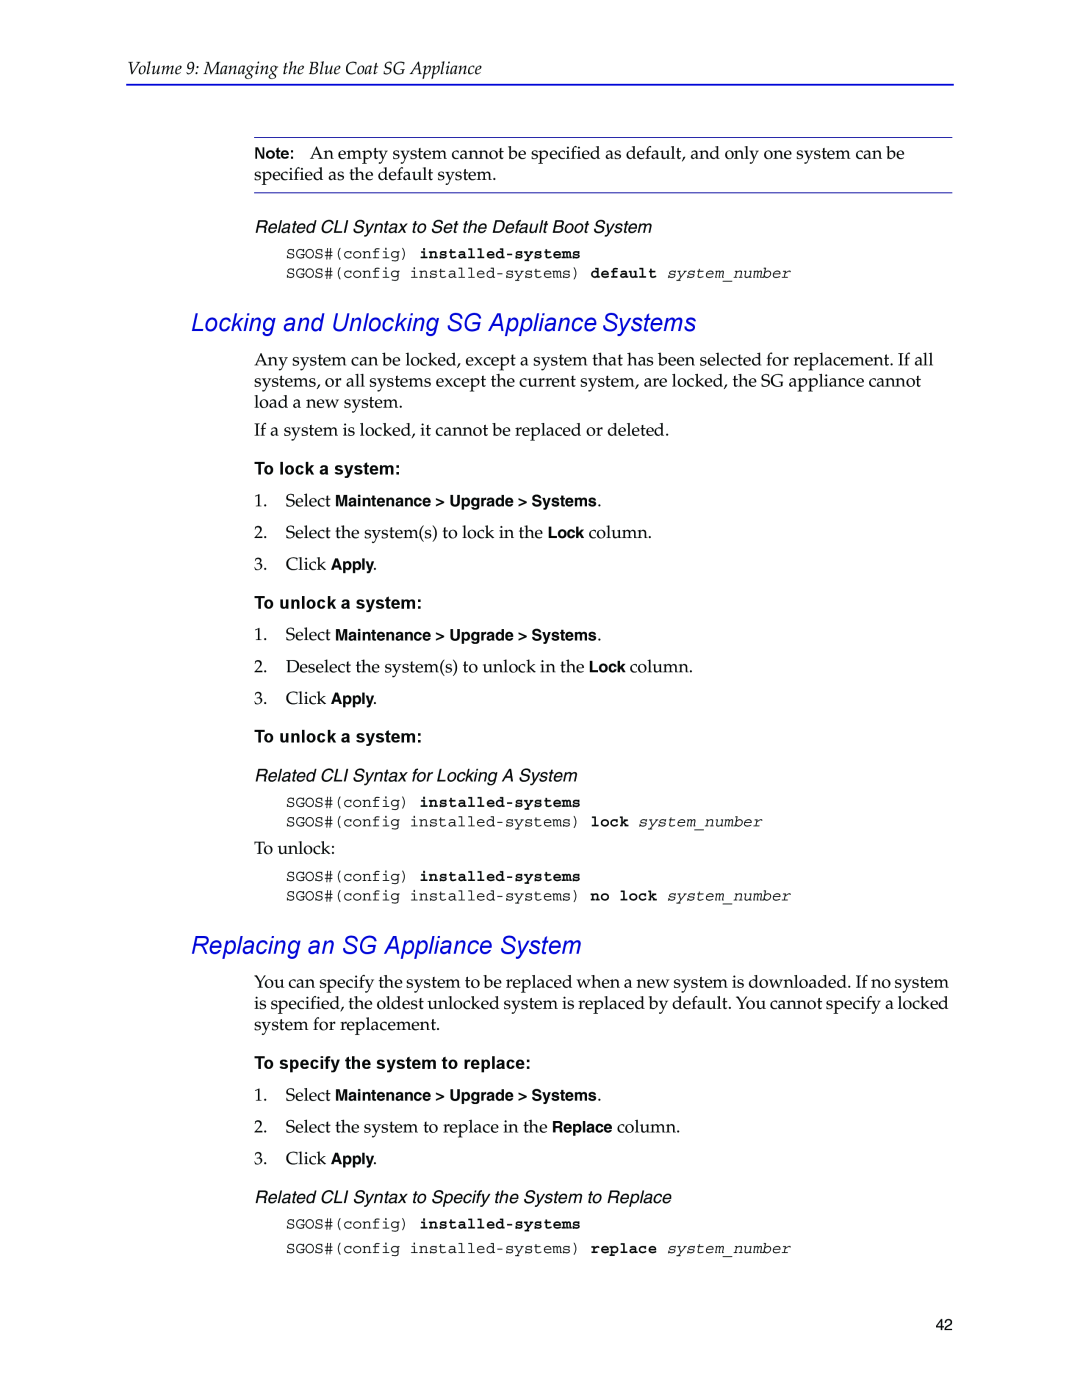 Blue Coat Systems SGOS Version 5.2.2 manual Locking and Unlocking SG Appliance Systems, Replacing an SG Appliance System 